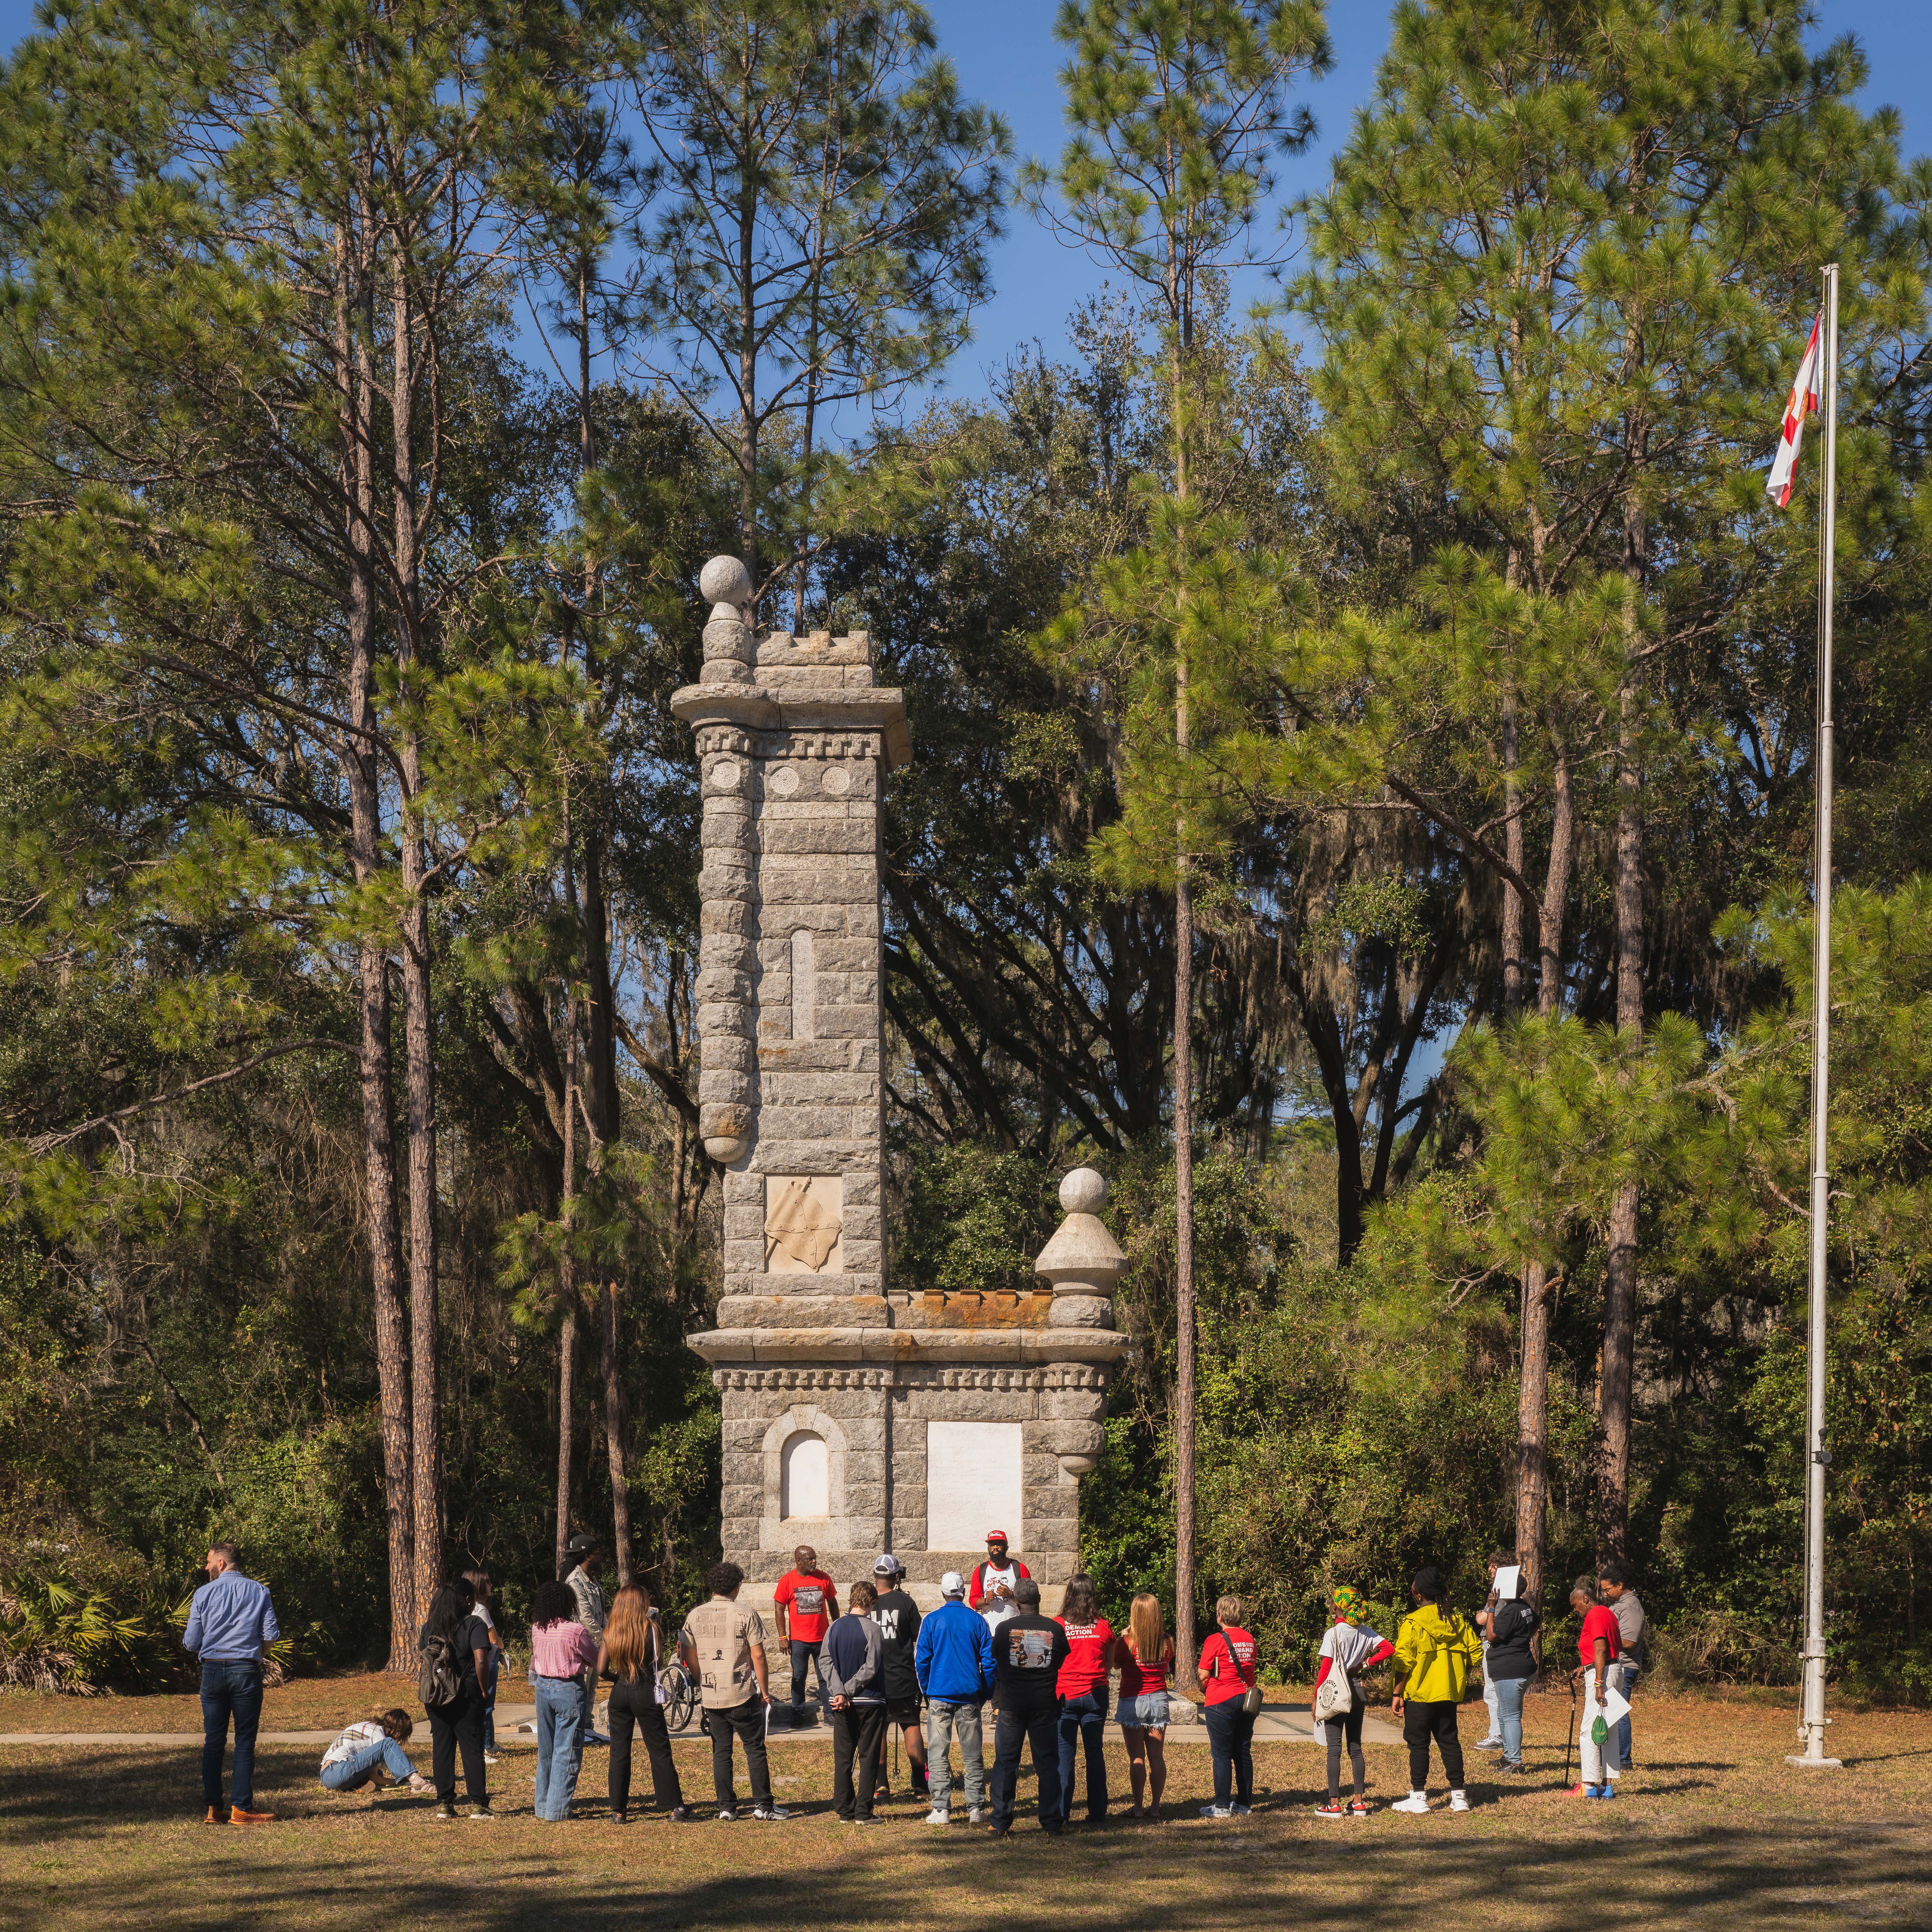 Group of people stand in front of a monument in a park setting with trees in background.